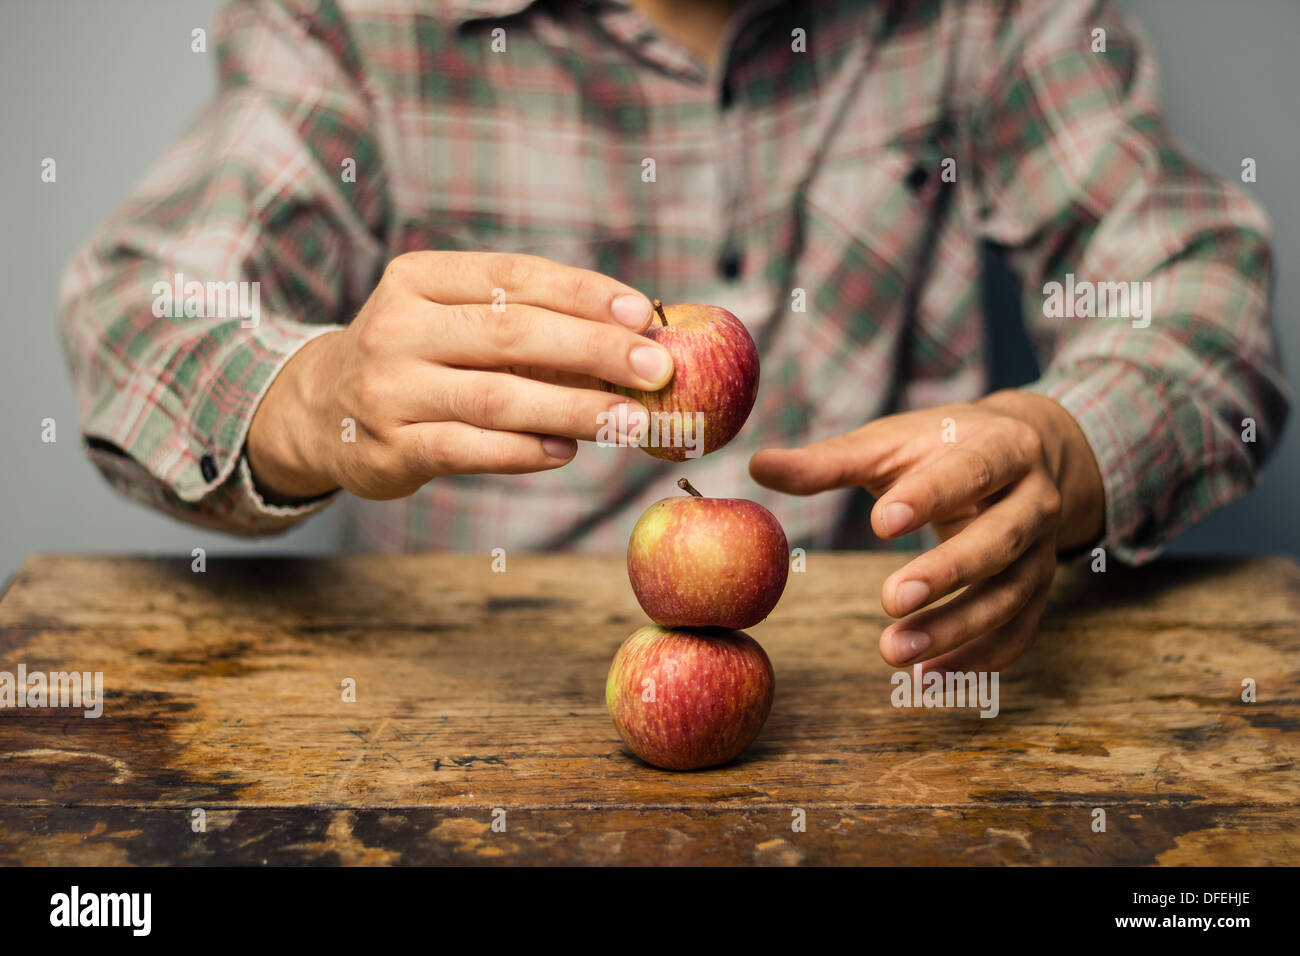 Young man is sitting at an old wooden table and stacking three apples on top of each other, to symbolize a balanced diet Stock Photo